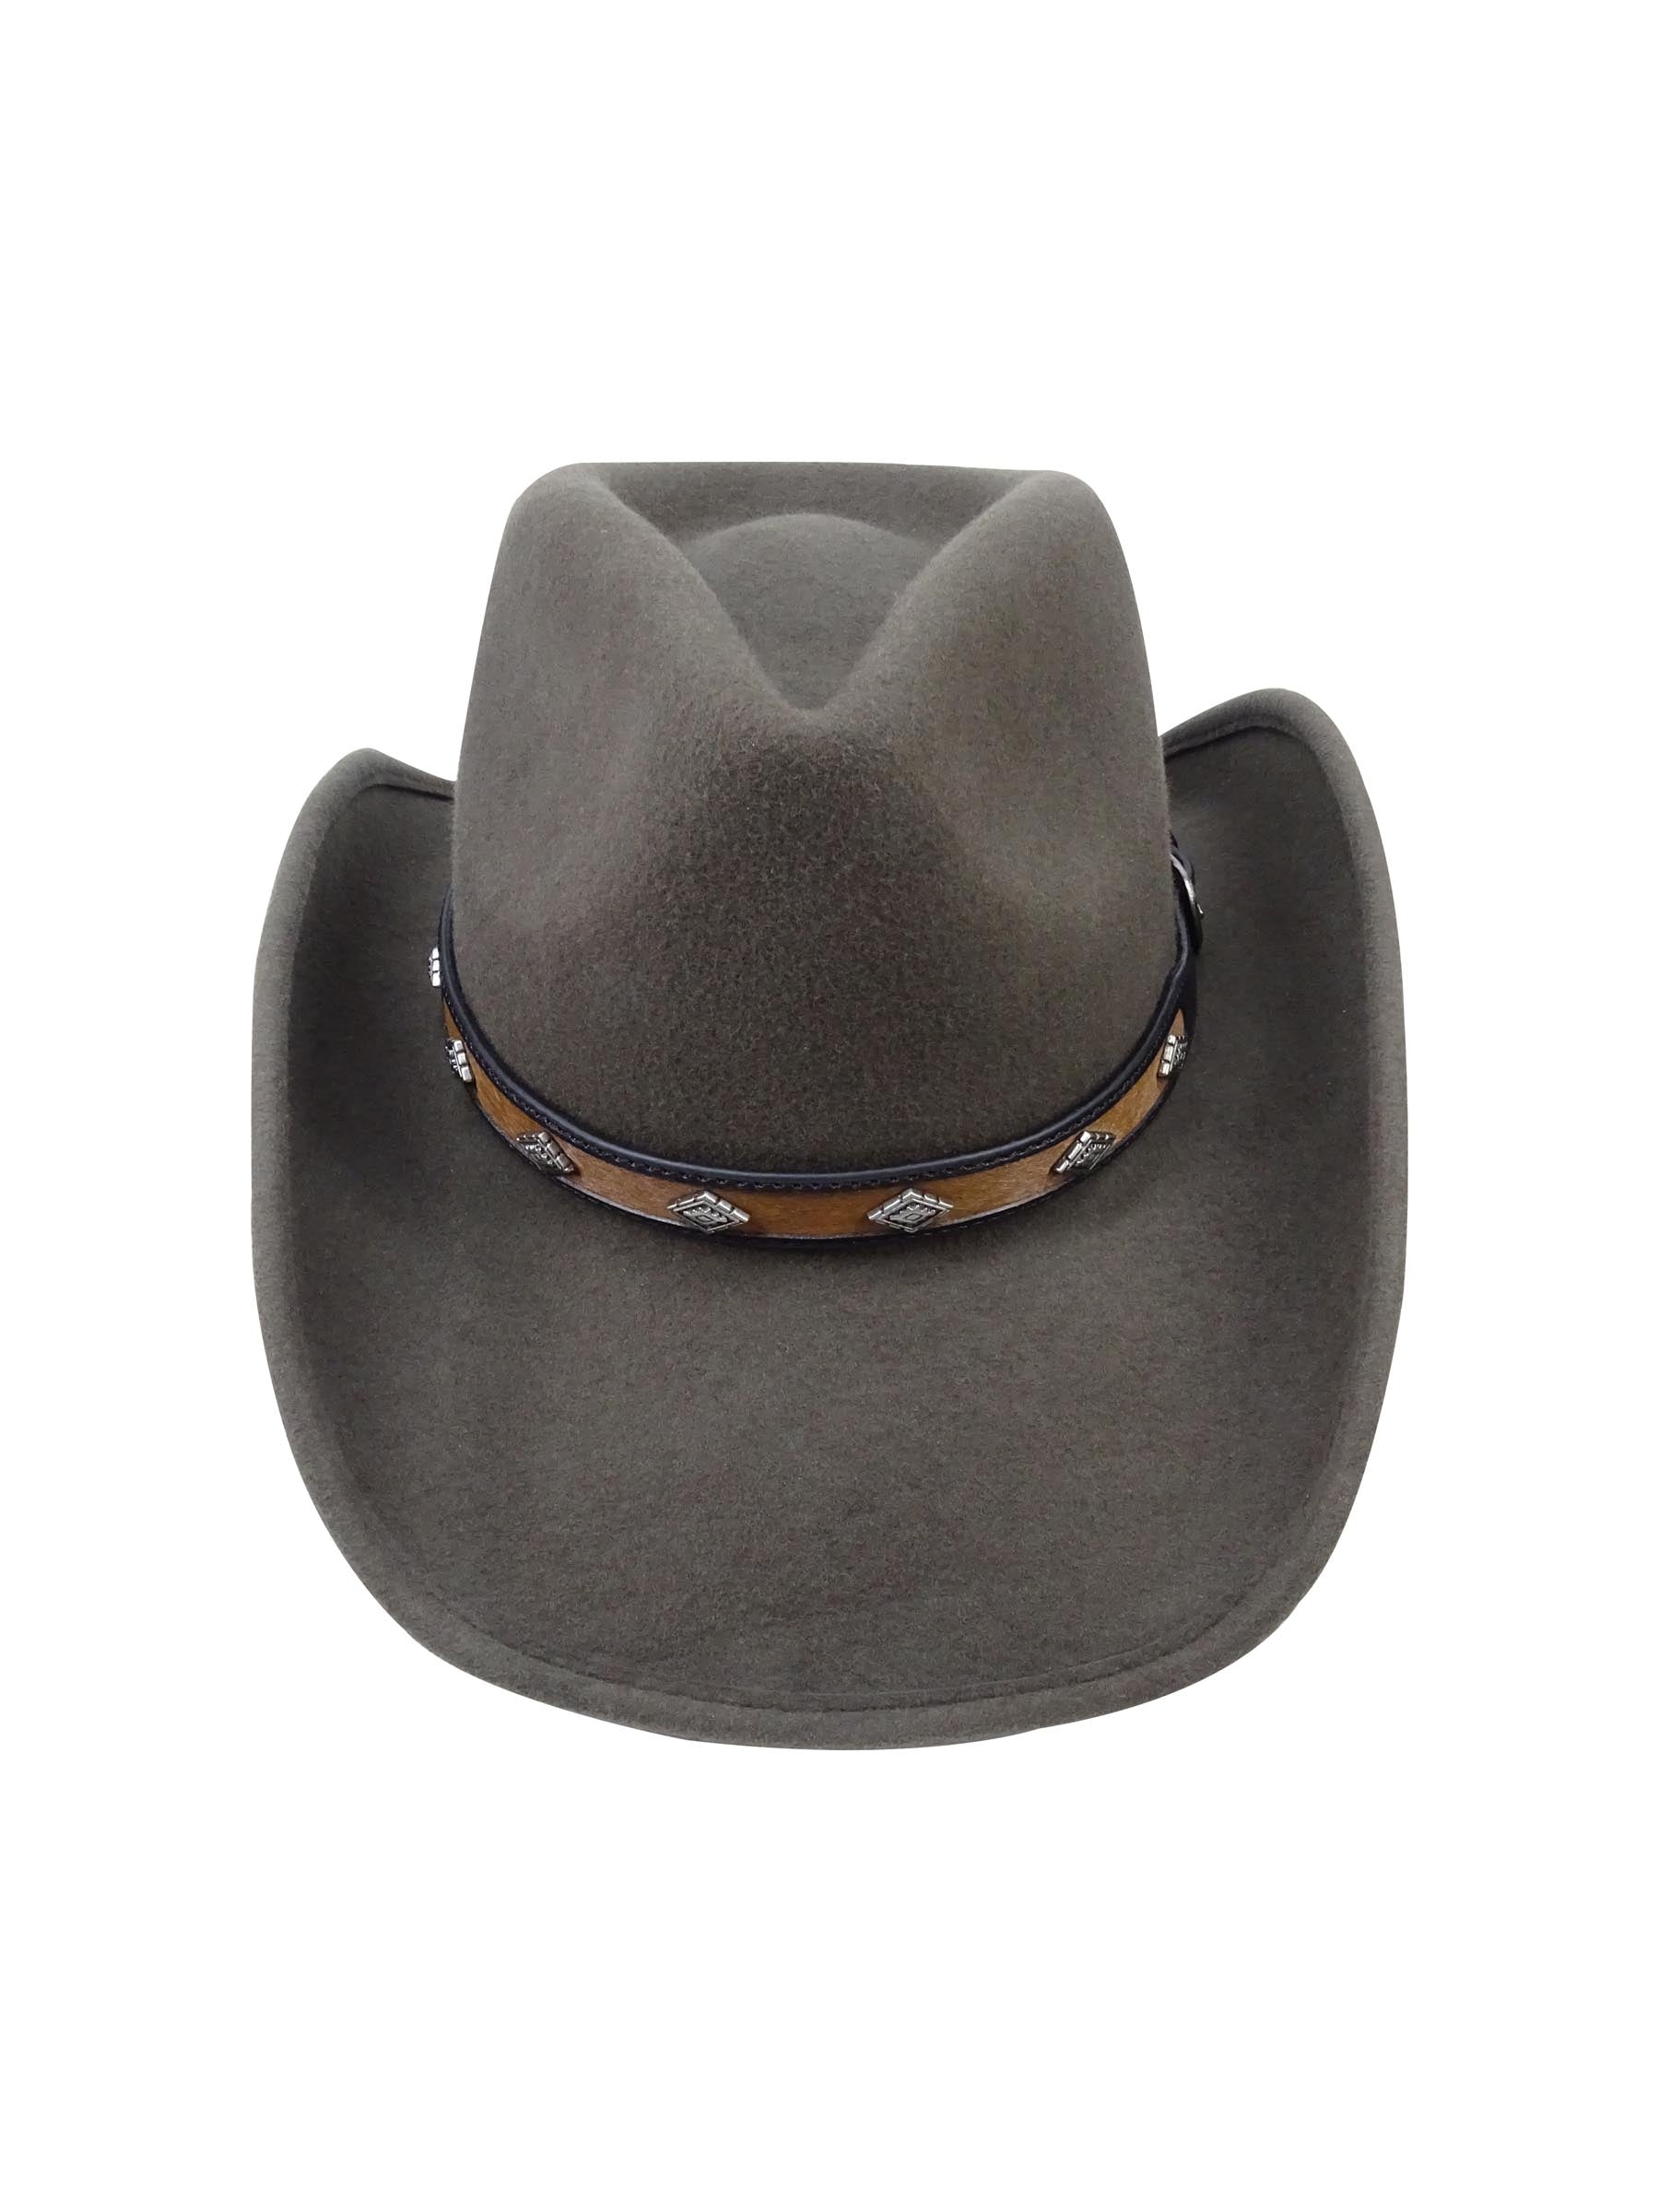 Beaded Vegan Leather Hat Bands for Cowboy Hats - Stylish Hat Accessories  for Men or Women - Three Strand Light Brown Wood Beads and Silver